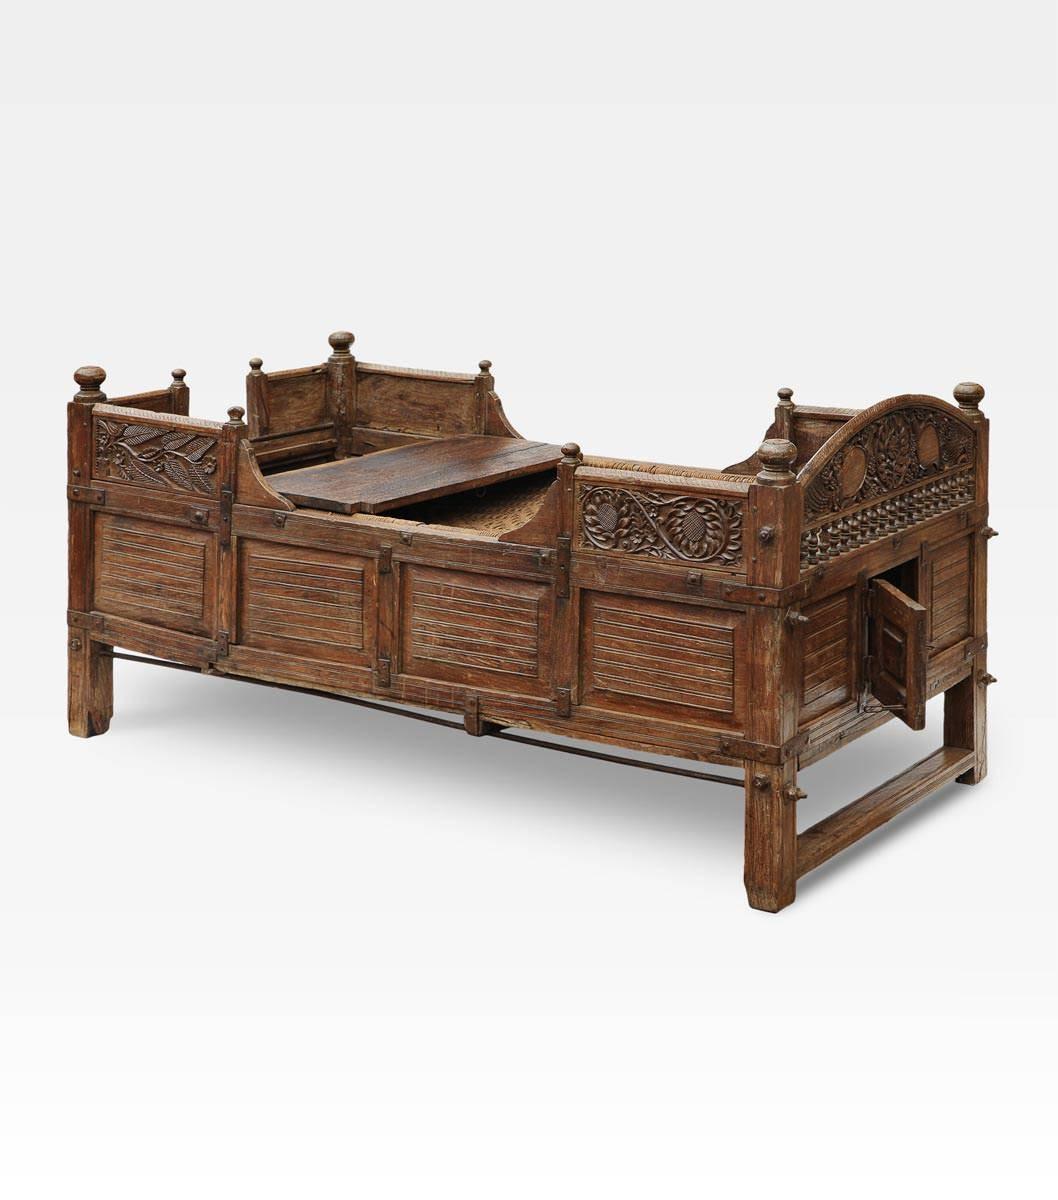 This ancient cot is a very important piece or furniture not only for its antiquity. Through decorations and carvings tells how from early childhood,  children were living in a world full of hidden meanings and symbols to propitiate their future.